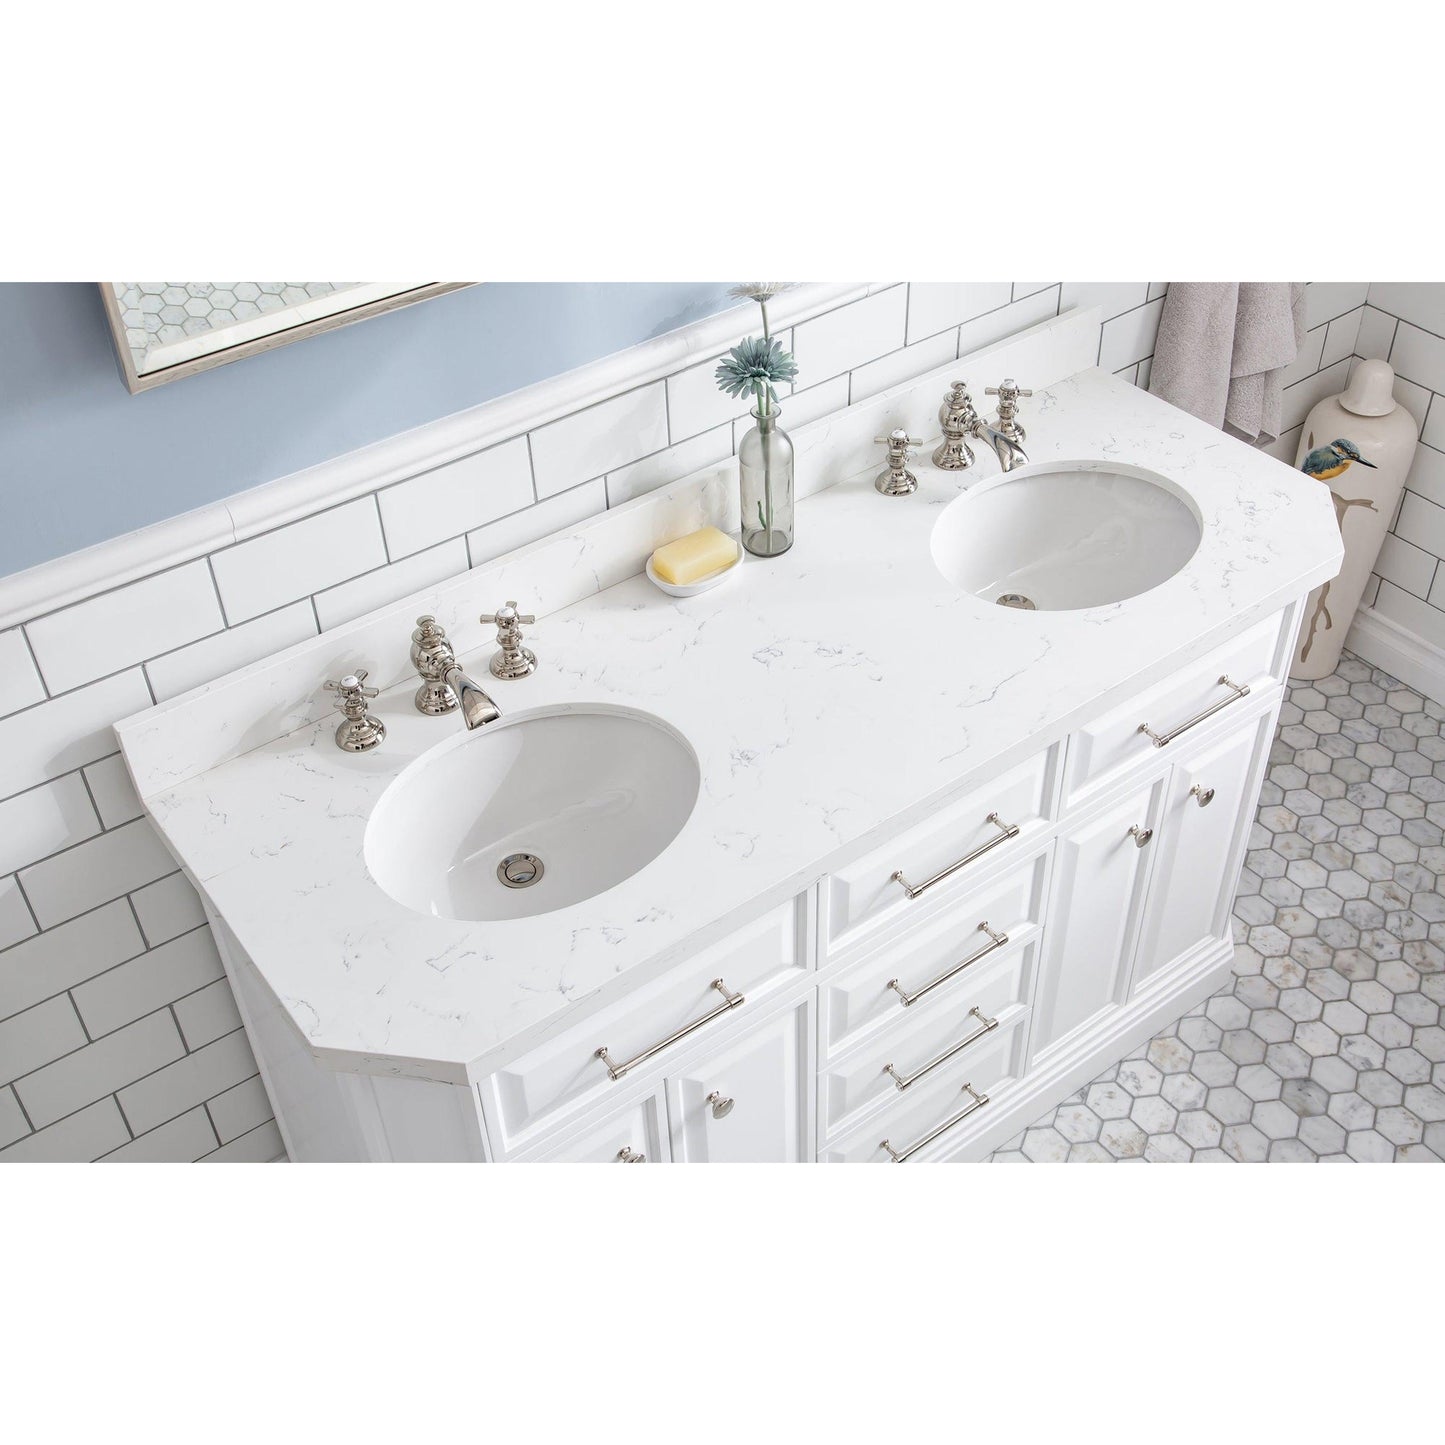 Water Creation Palace 60" Quartz Carrara Pure White Bathroom Vanity Set With Hardware And F2-0013 Faucets in Polished Nickel (PVD) Finish